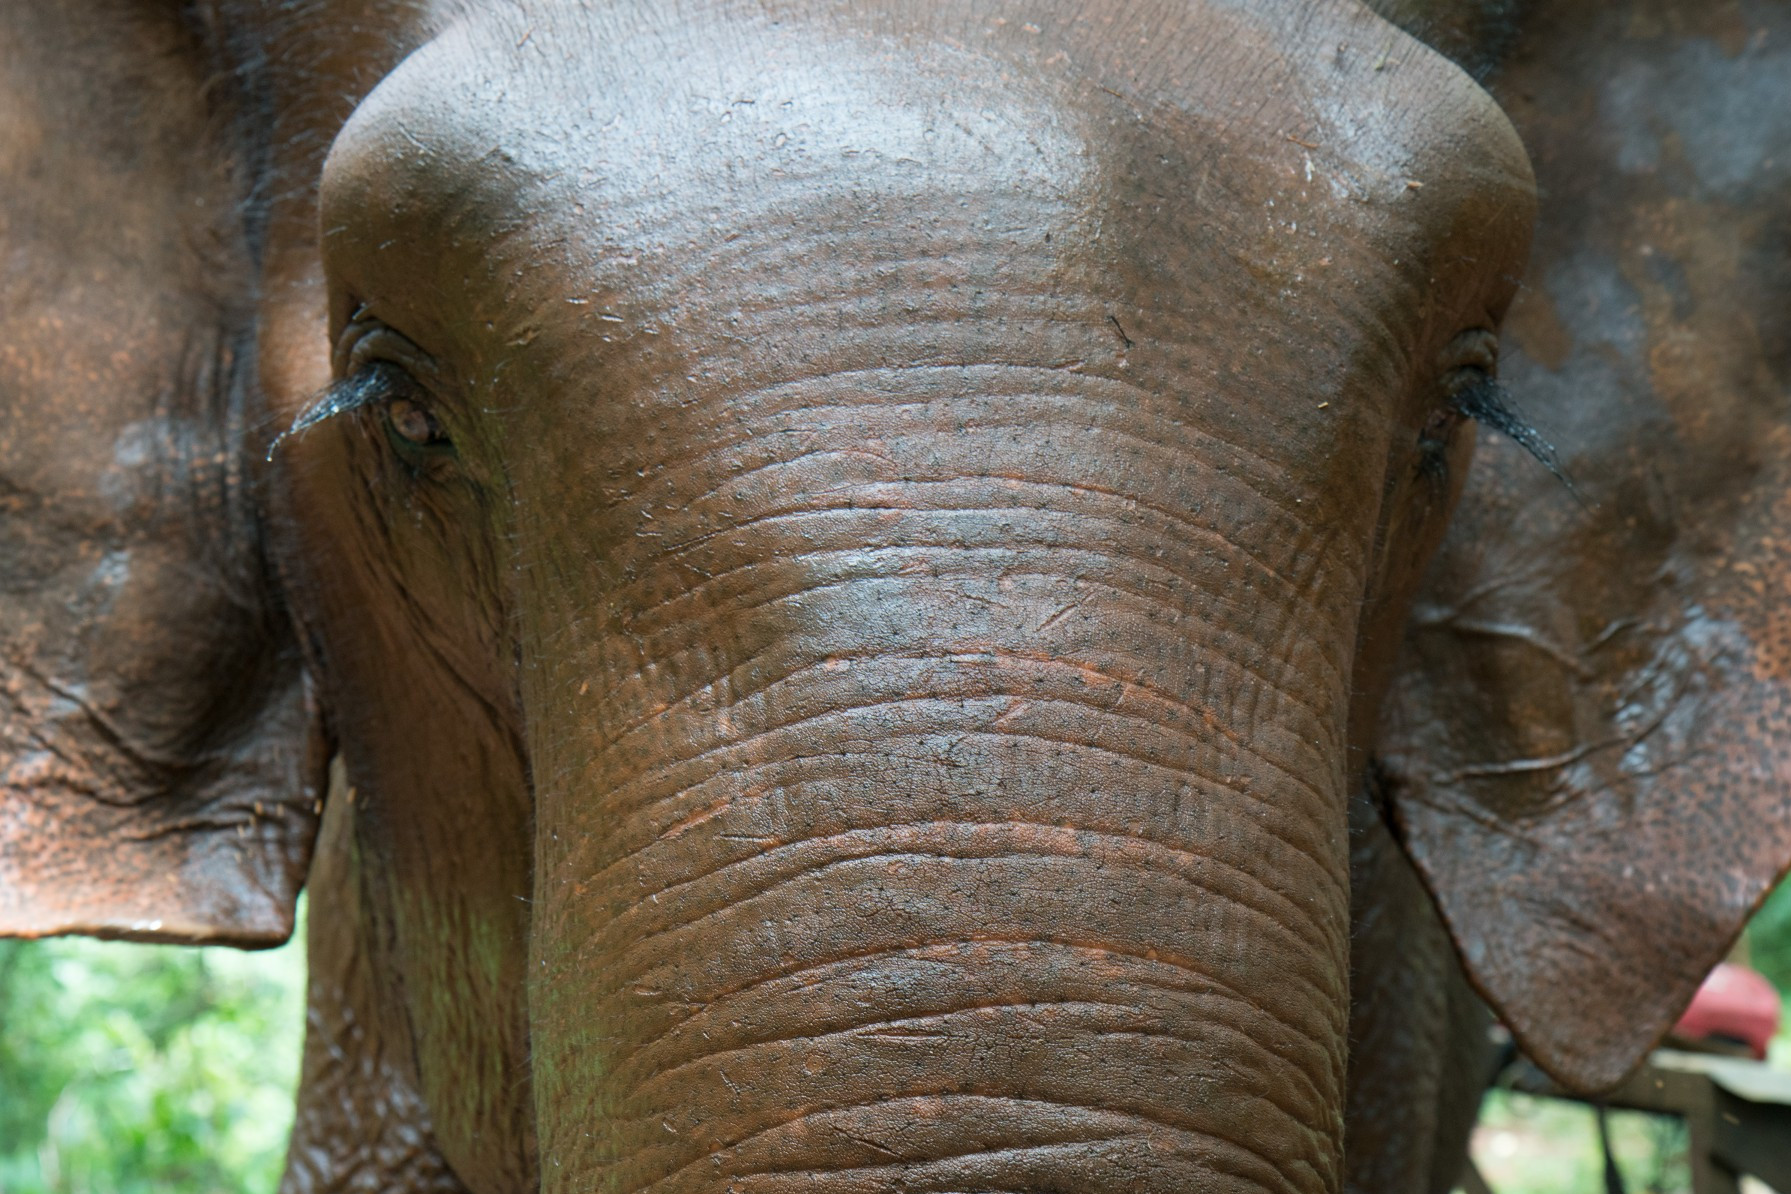 Pictured: The front of an elephant's face.